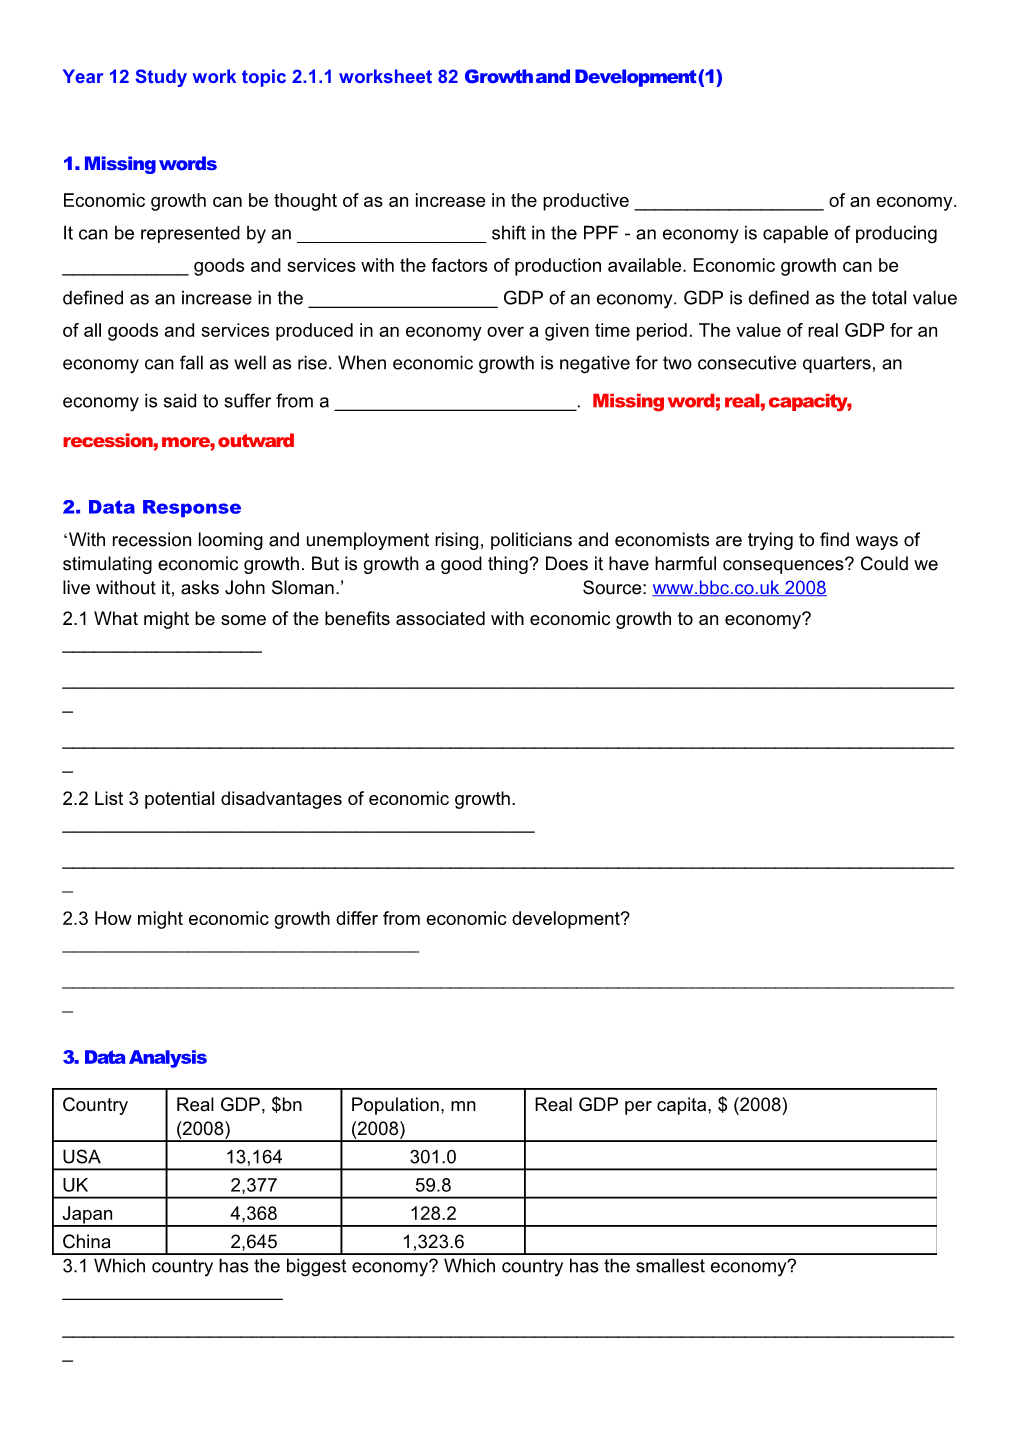 Year 12 Study Work Topic 2.1.1 Worksheet 82 Growth and Development (1)